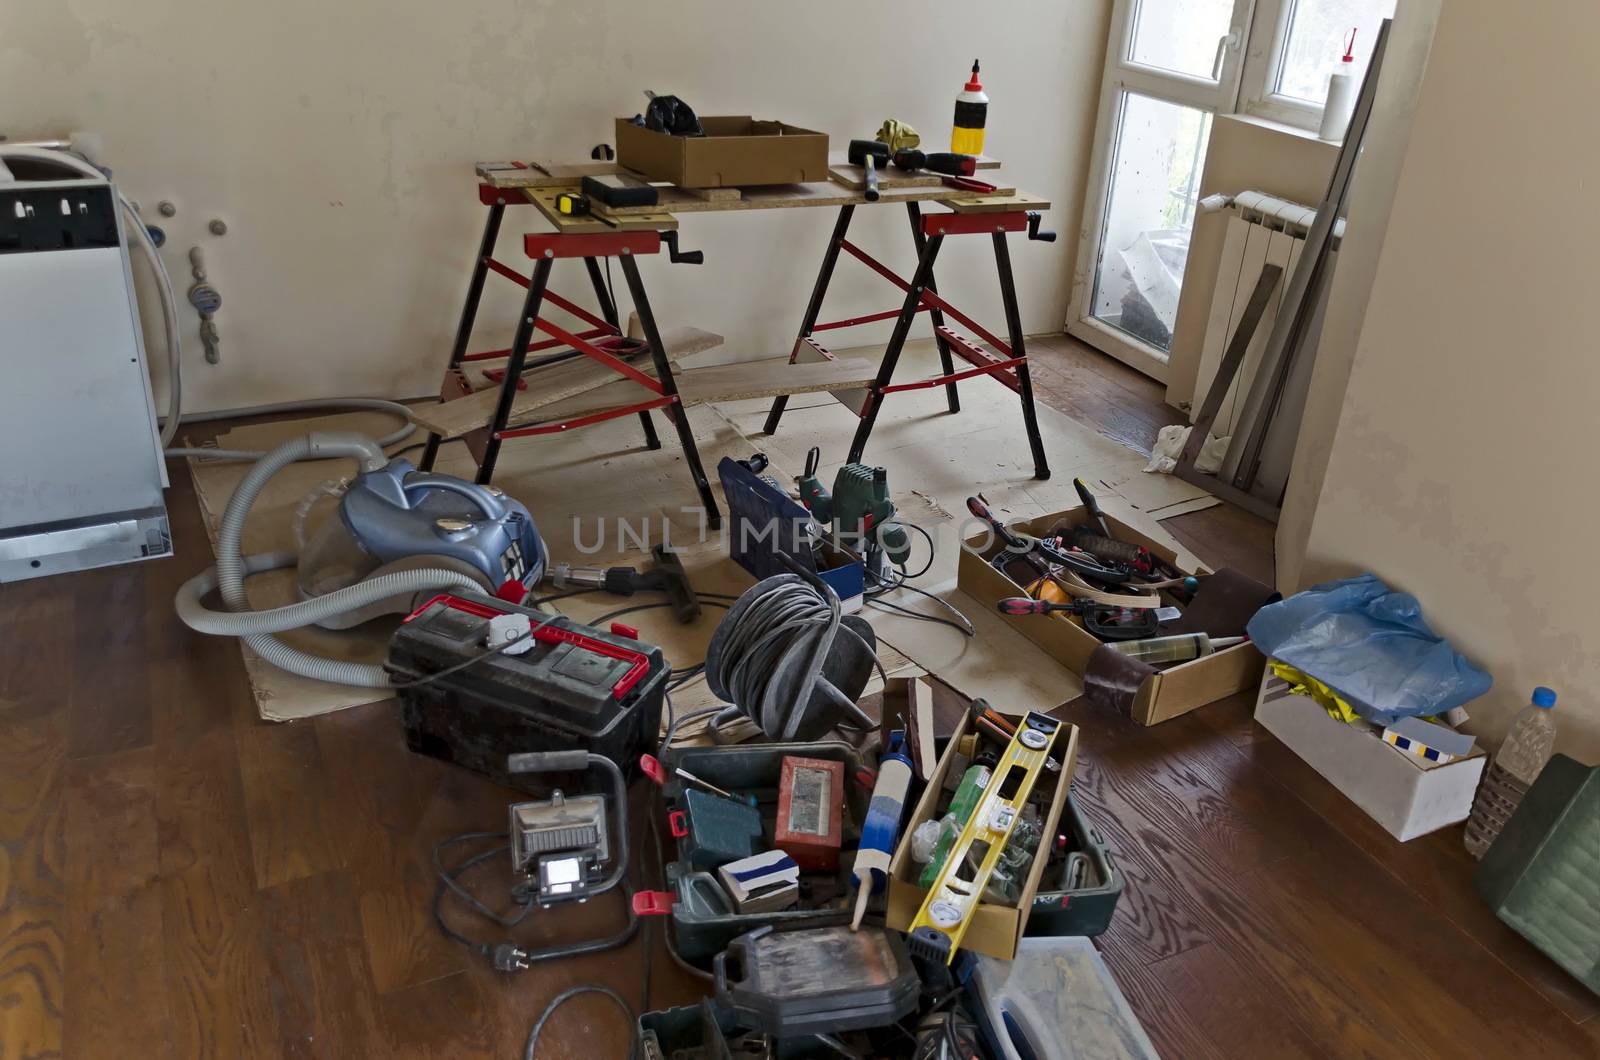 Renovation of a room with some tools for cutting and assembling furniture, Sofia, Bulgaria